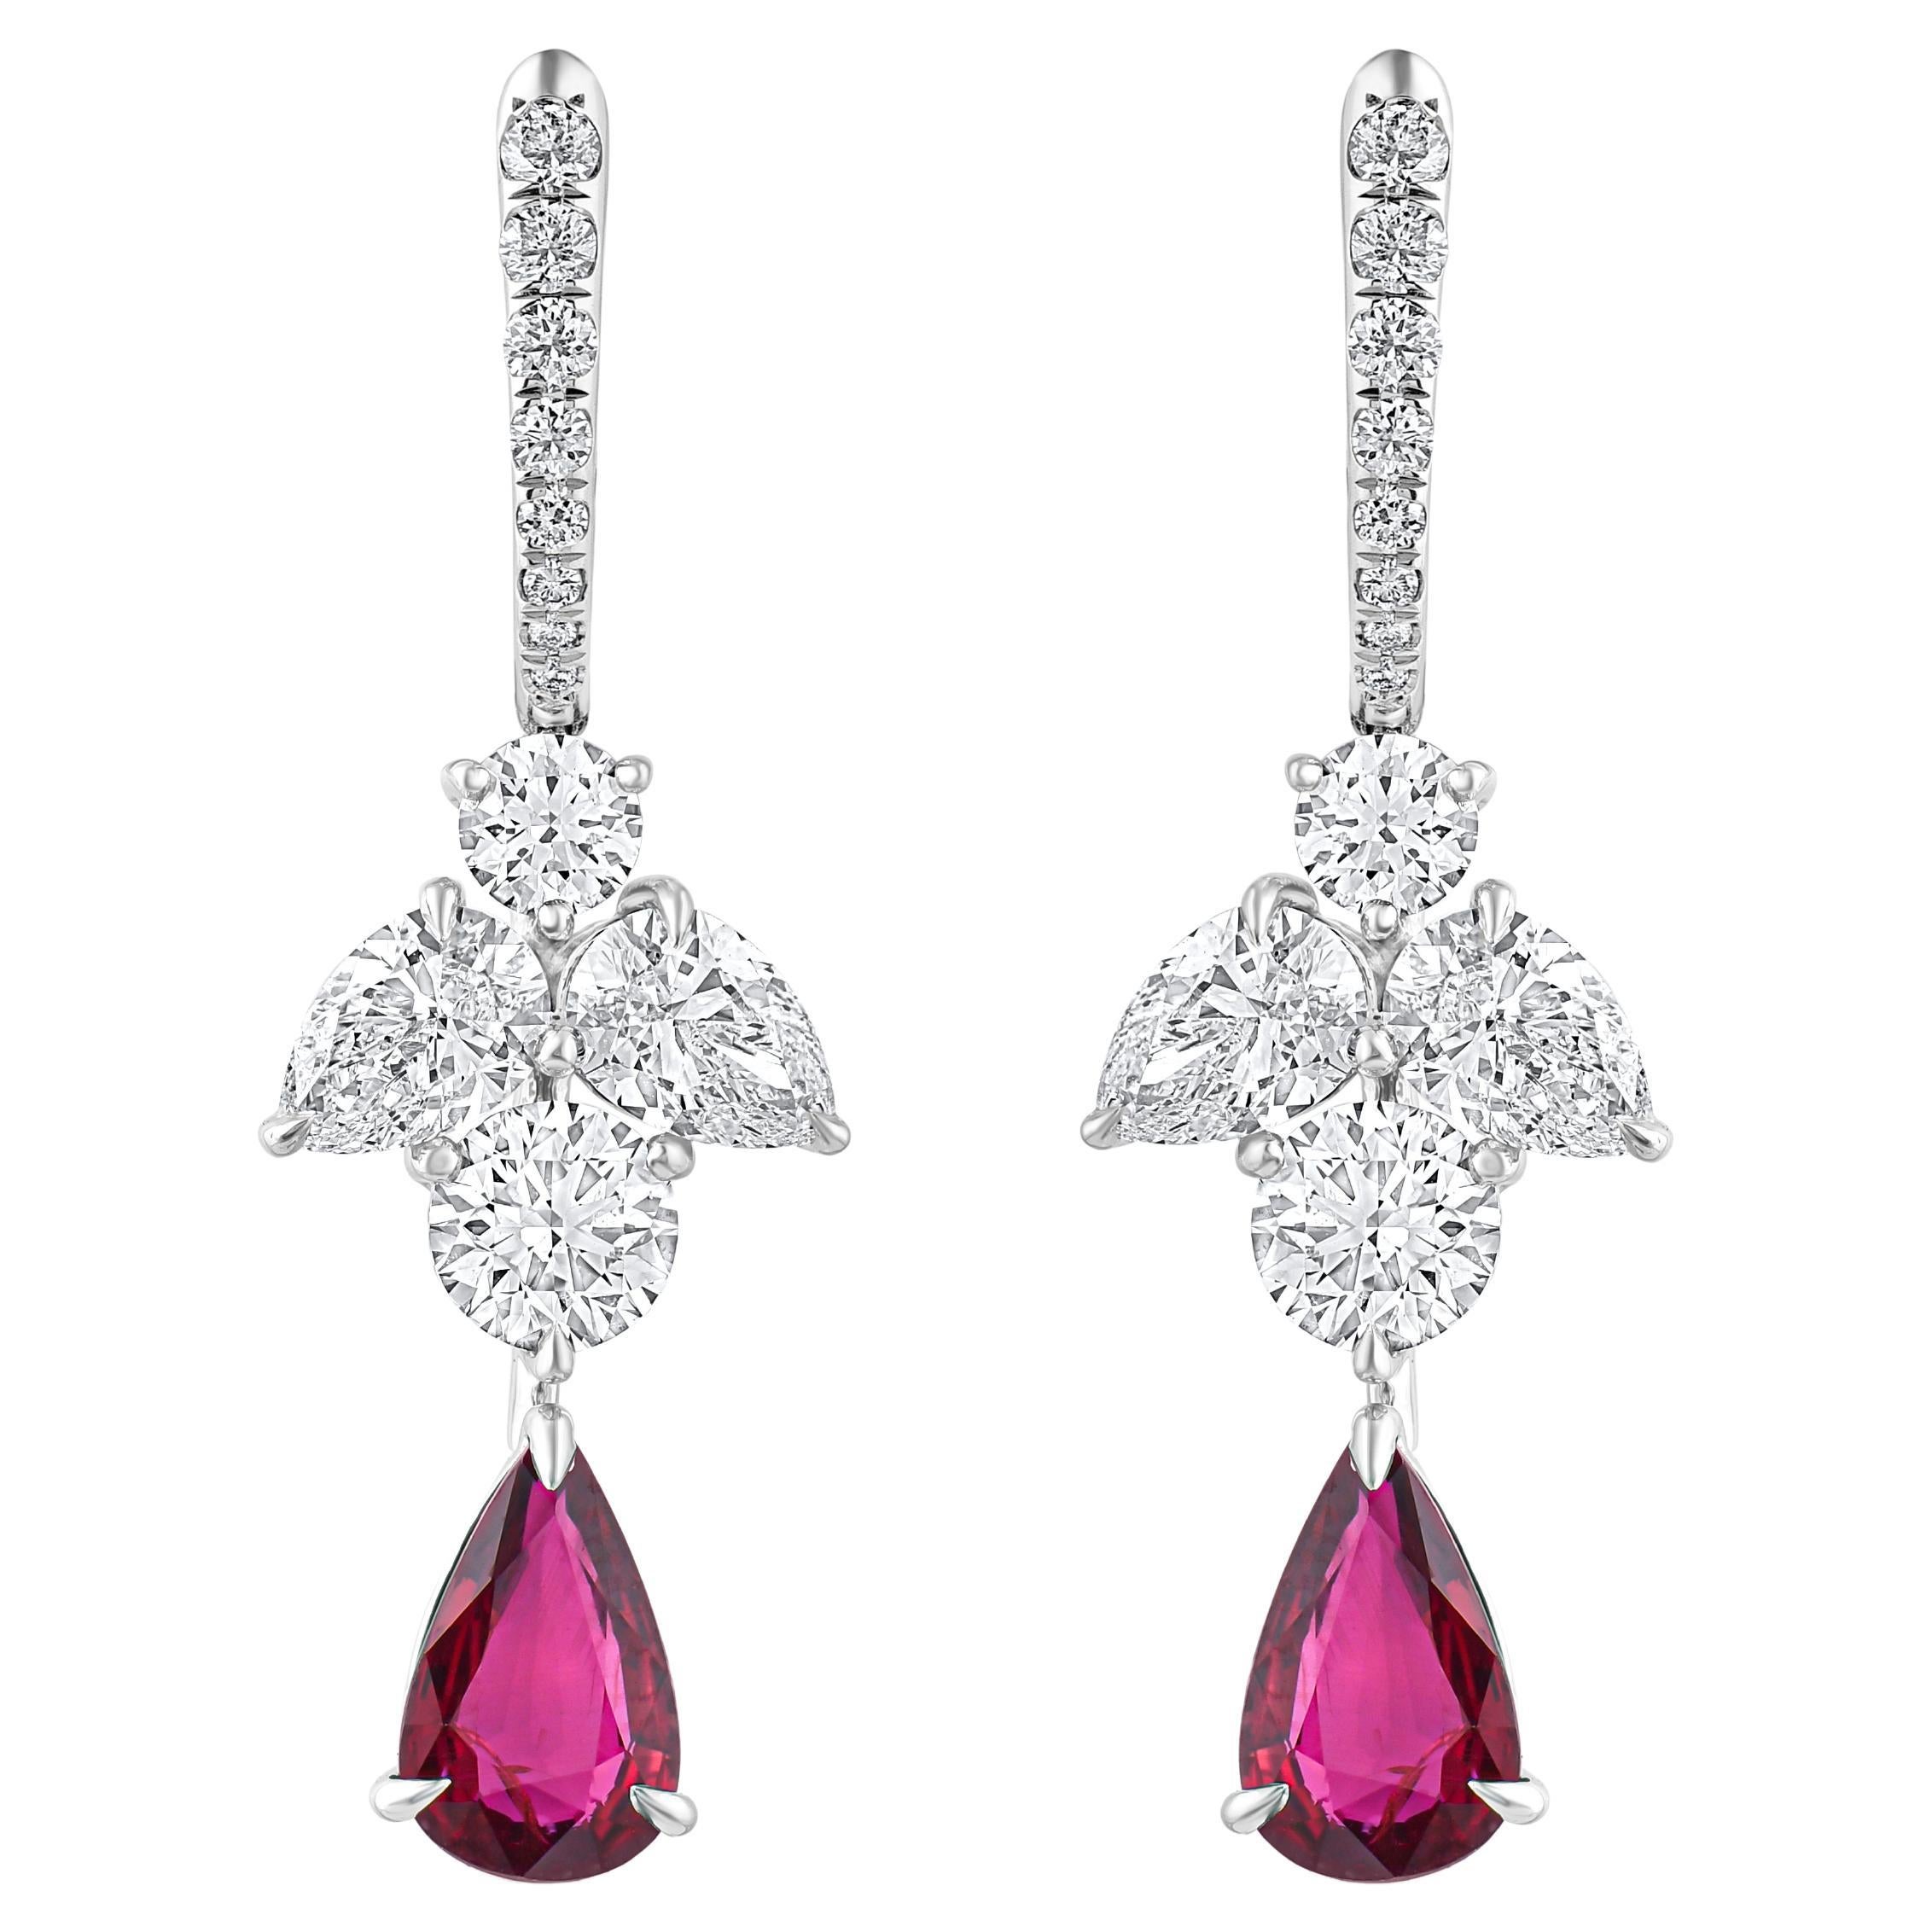 HARAKH 3 Carat Brilliant Cut Colorless Diamond and Ruby Gemstone Earrings For Sale